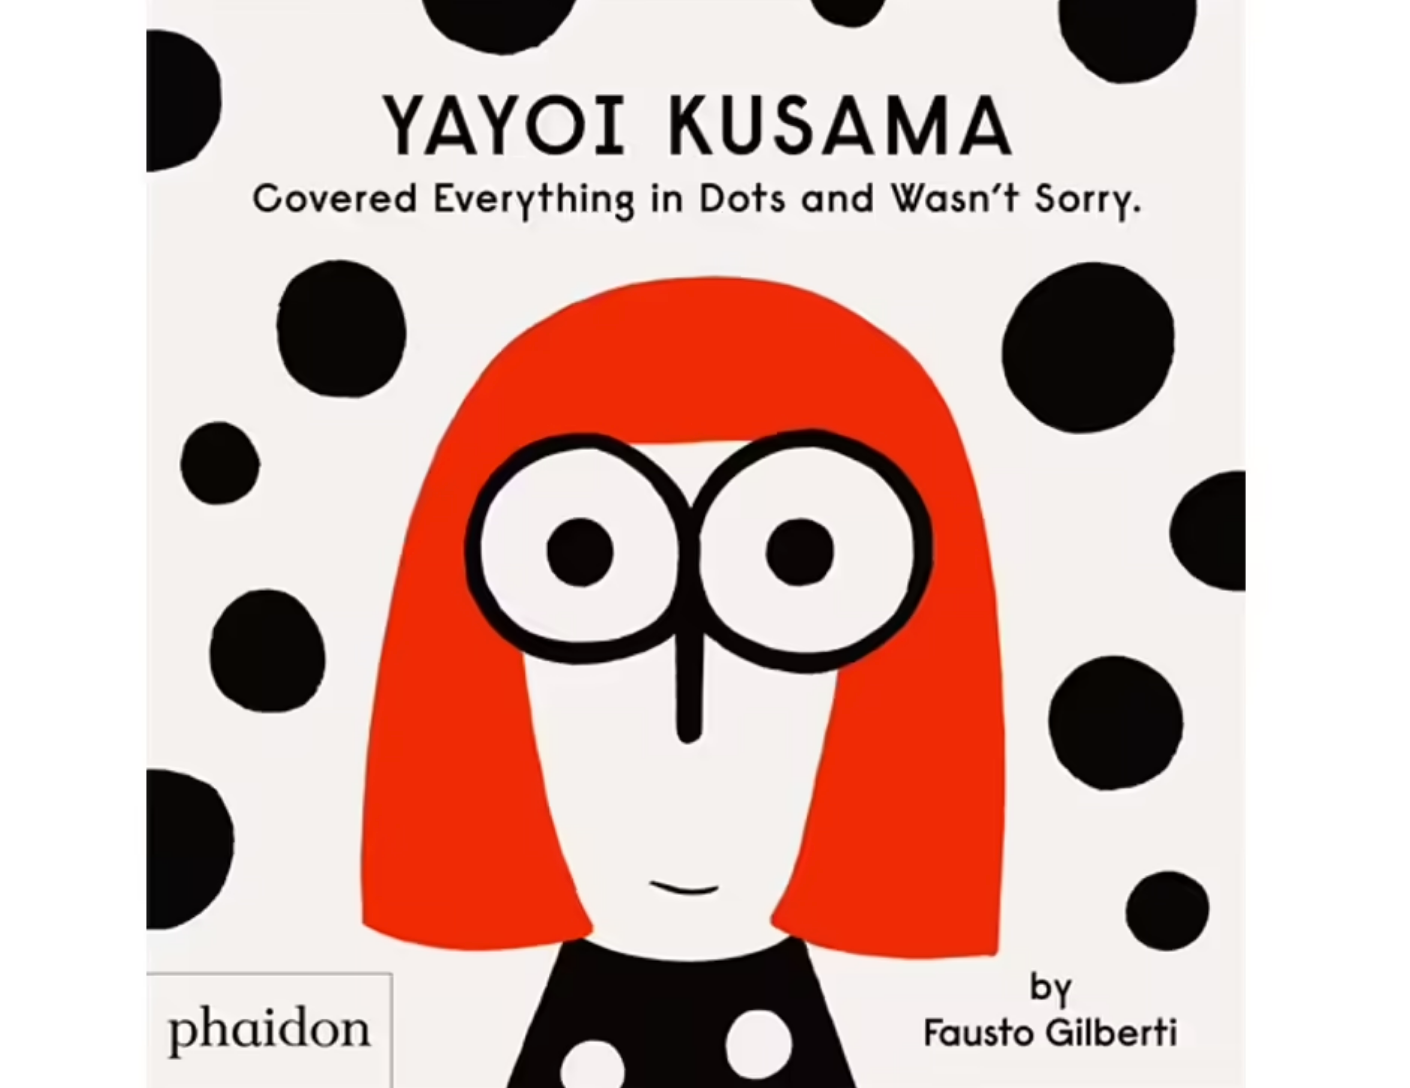 Yayoi Kusama Covered Everything in Dots and Wasn't Sorry x Fausto Gilberti